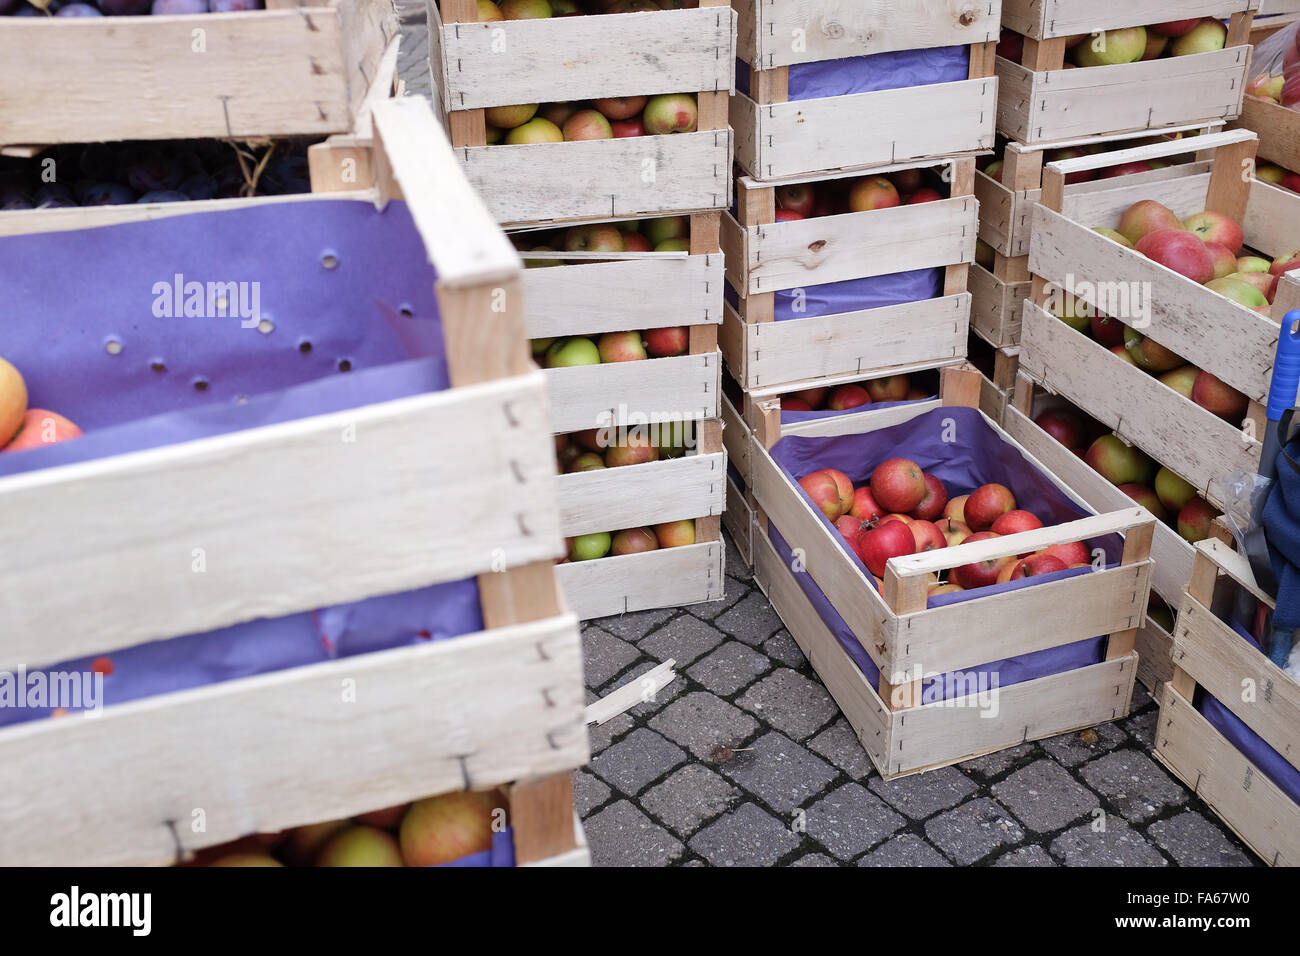 Crates of apples stacked in market Stock Photo